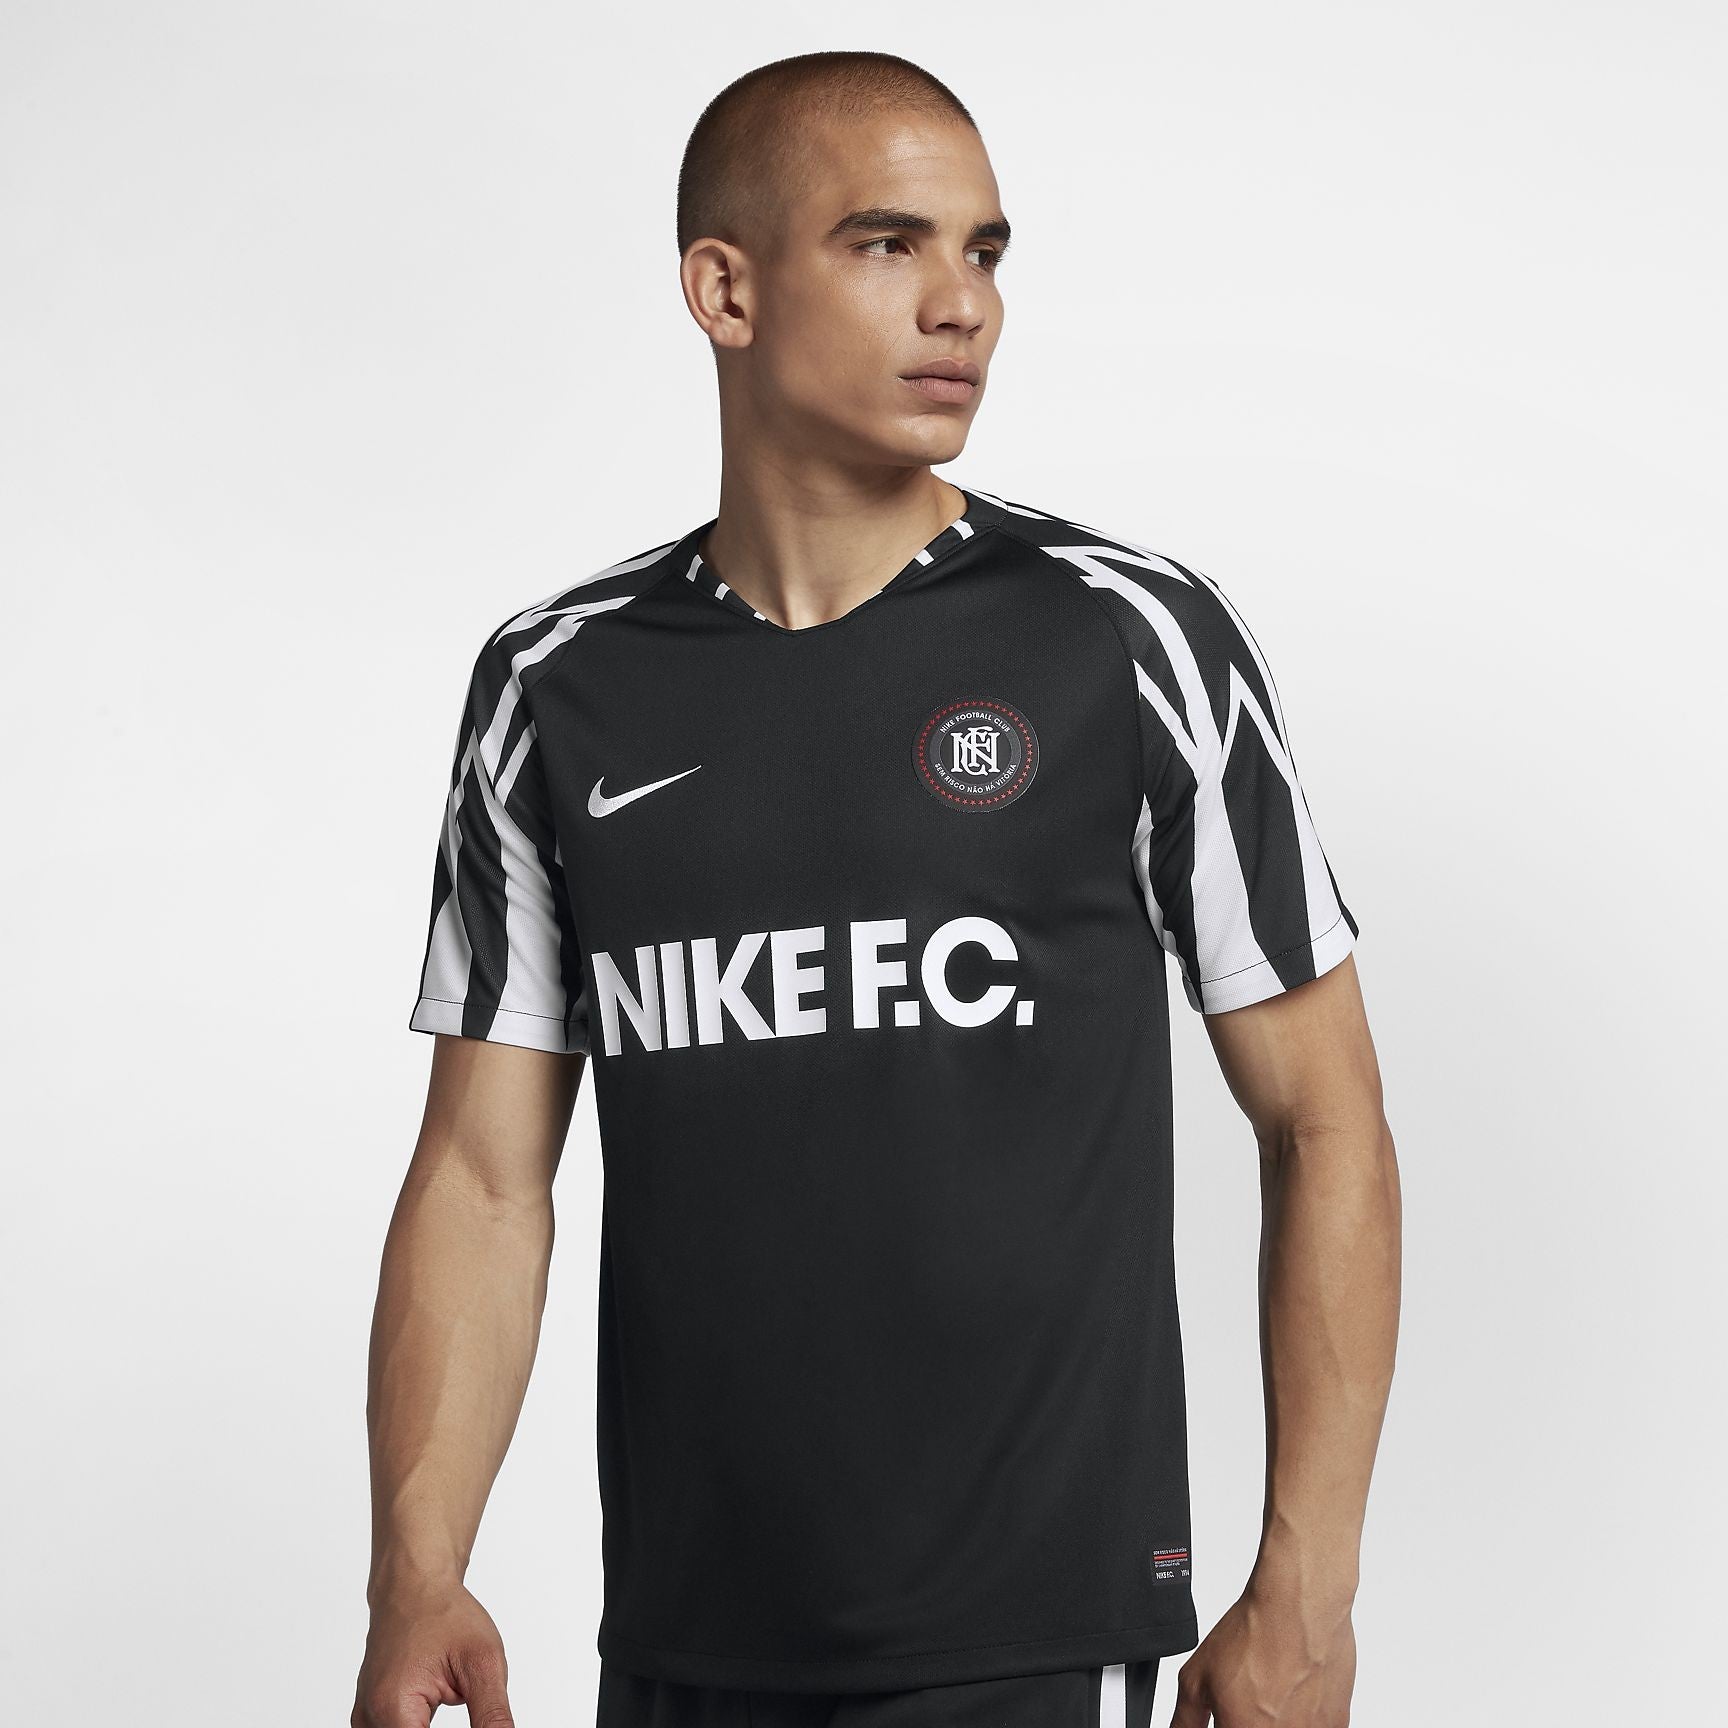 nike fc jersey black and white